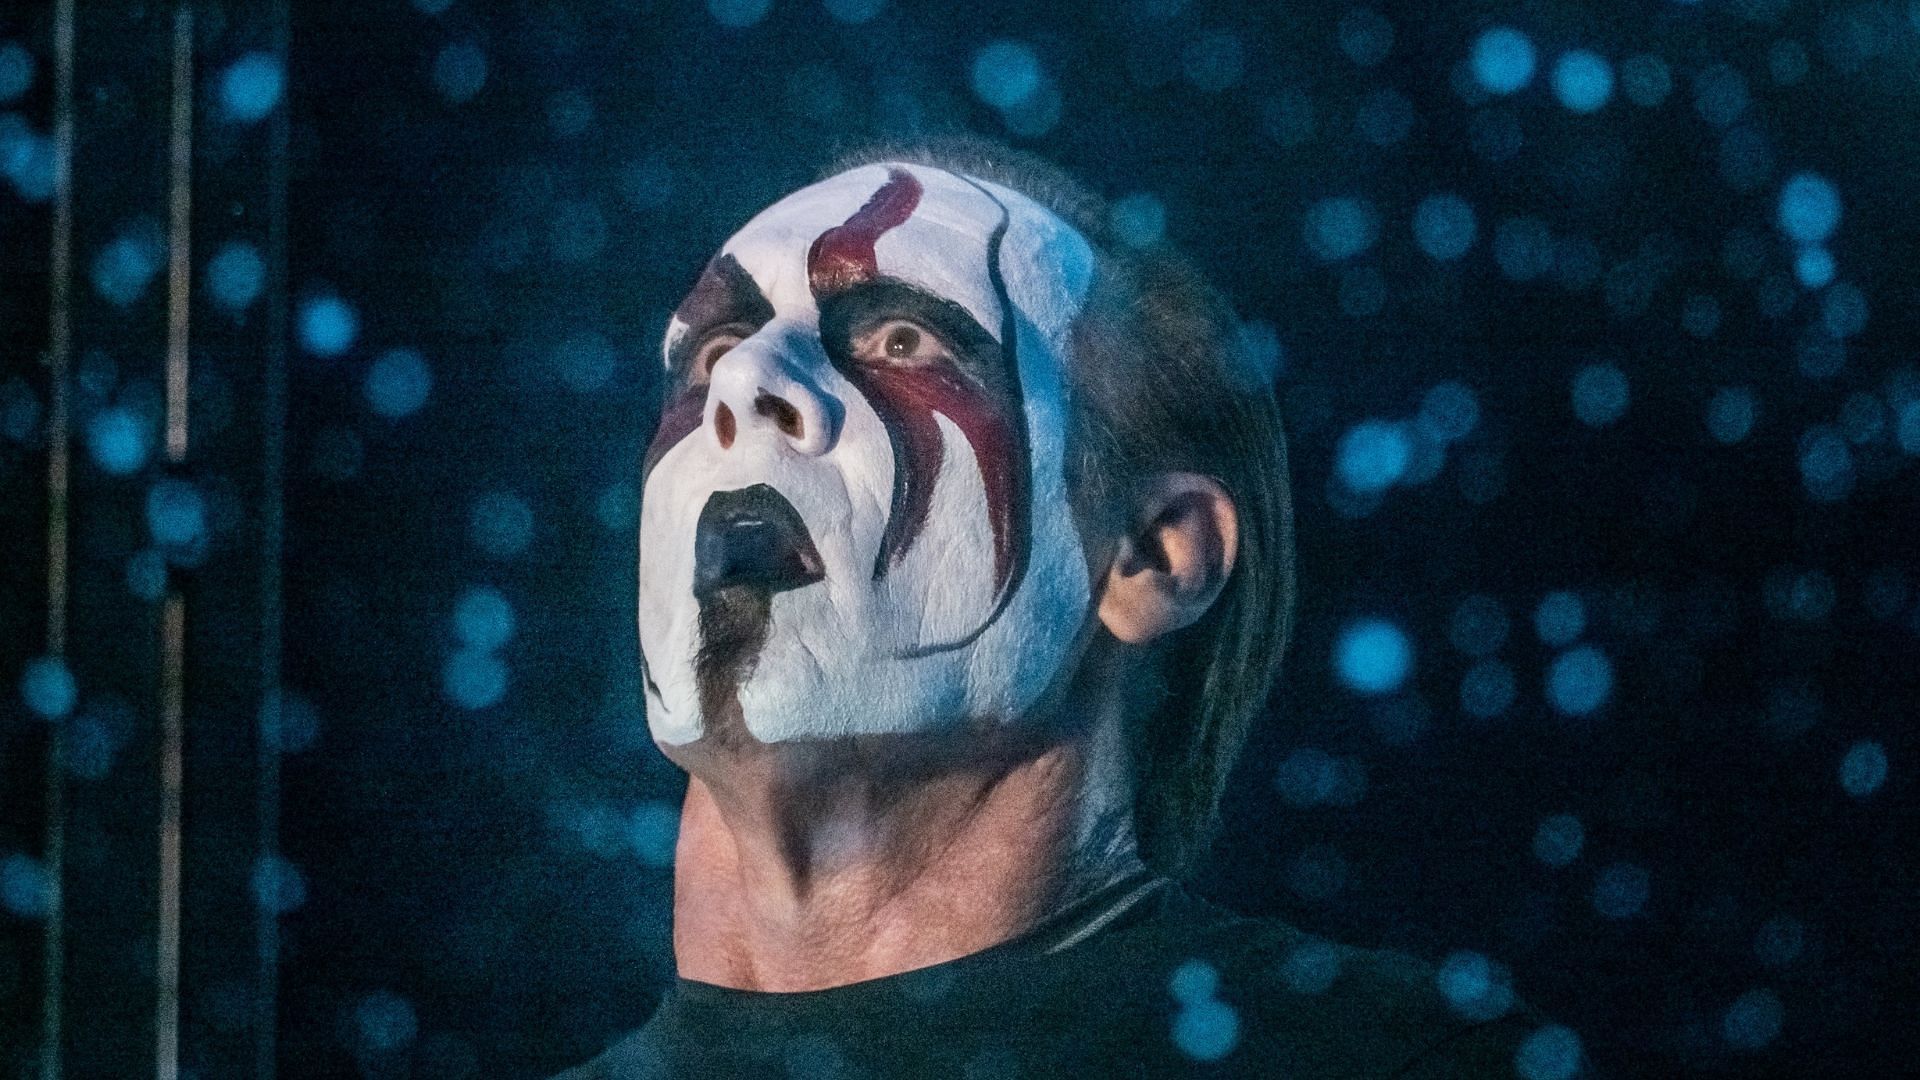 Sting making his entrance at an AEW event in 2022